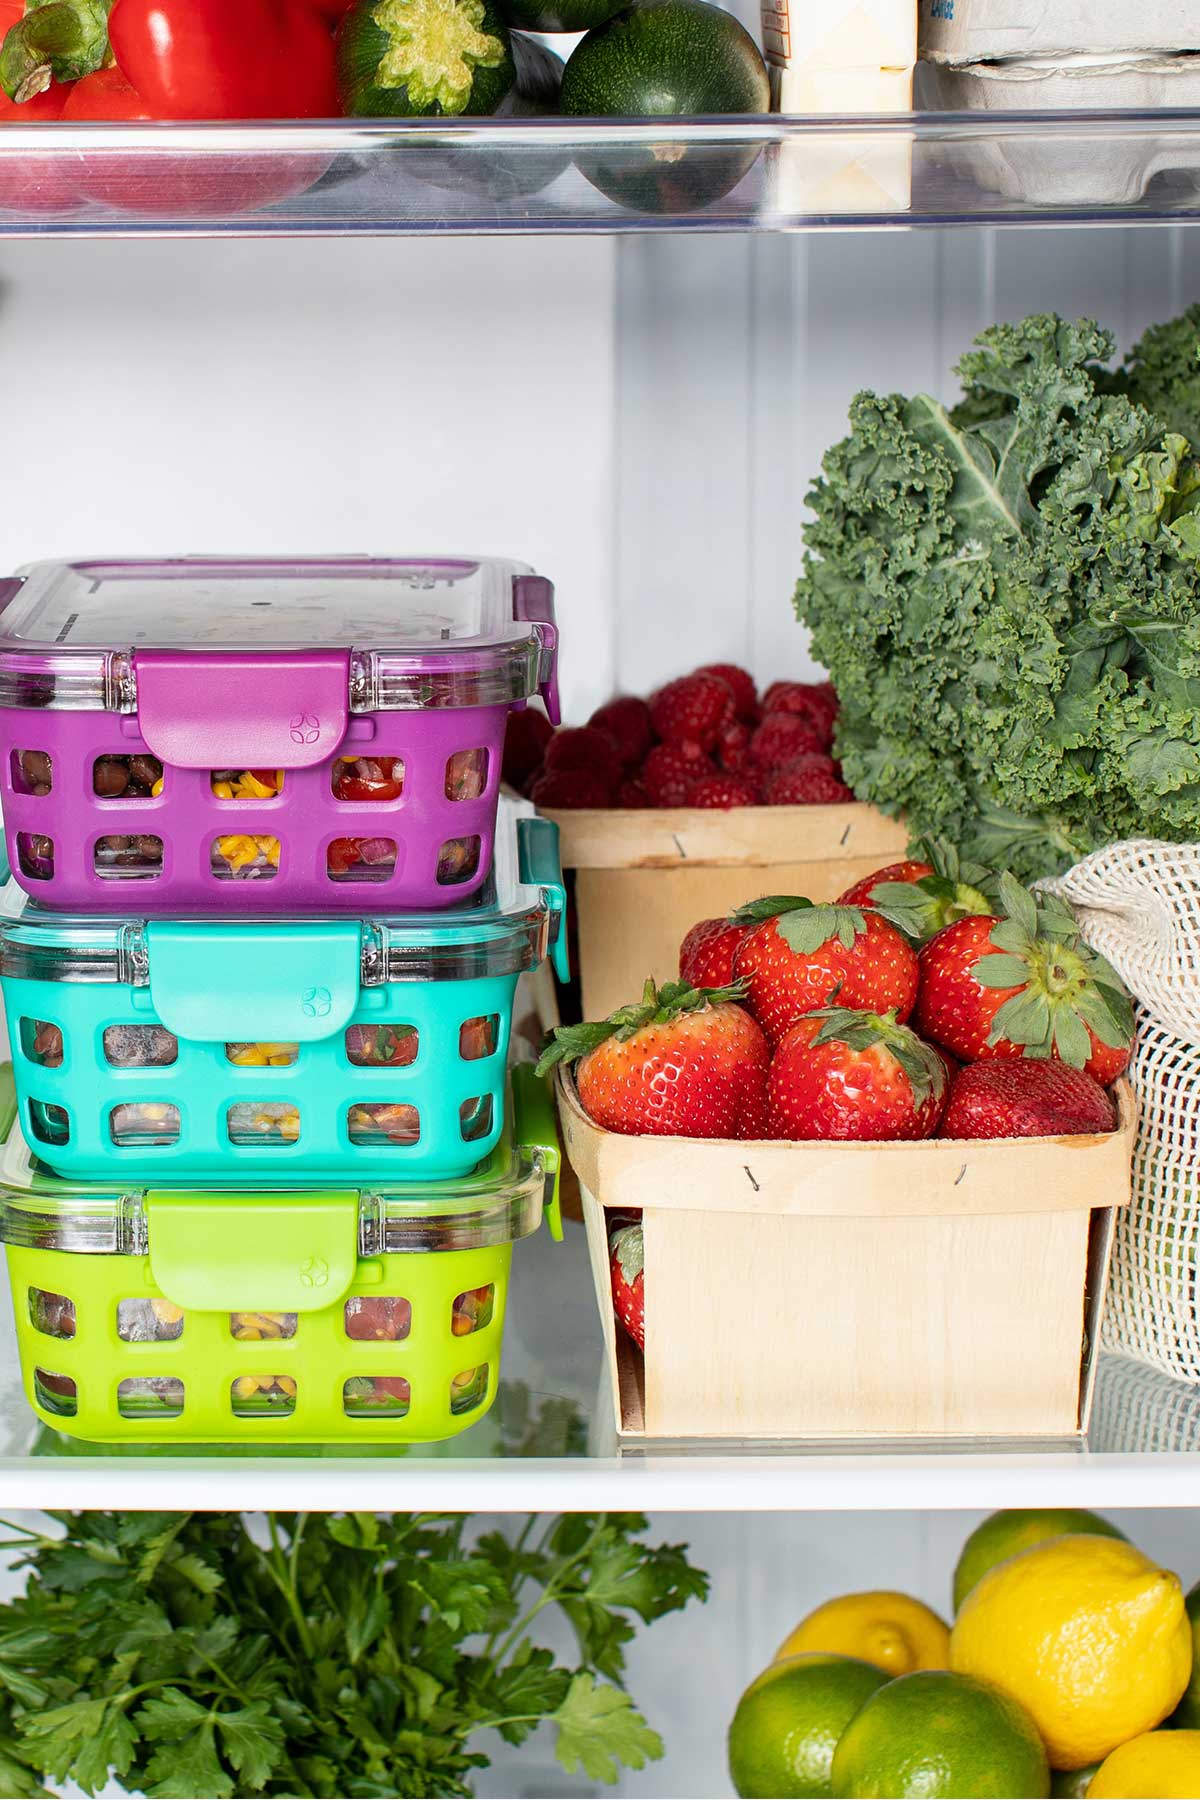 Refrigerator view with healthy containers of food, strawberries, kale, lemons, limes, cilantro, brussels sprouts, milk